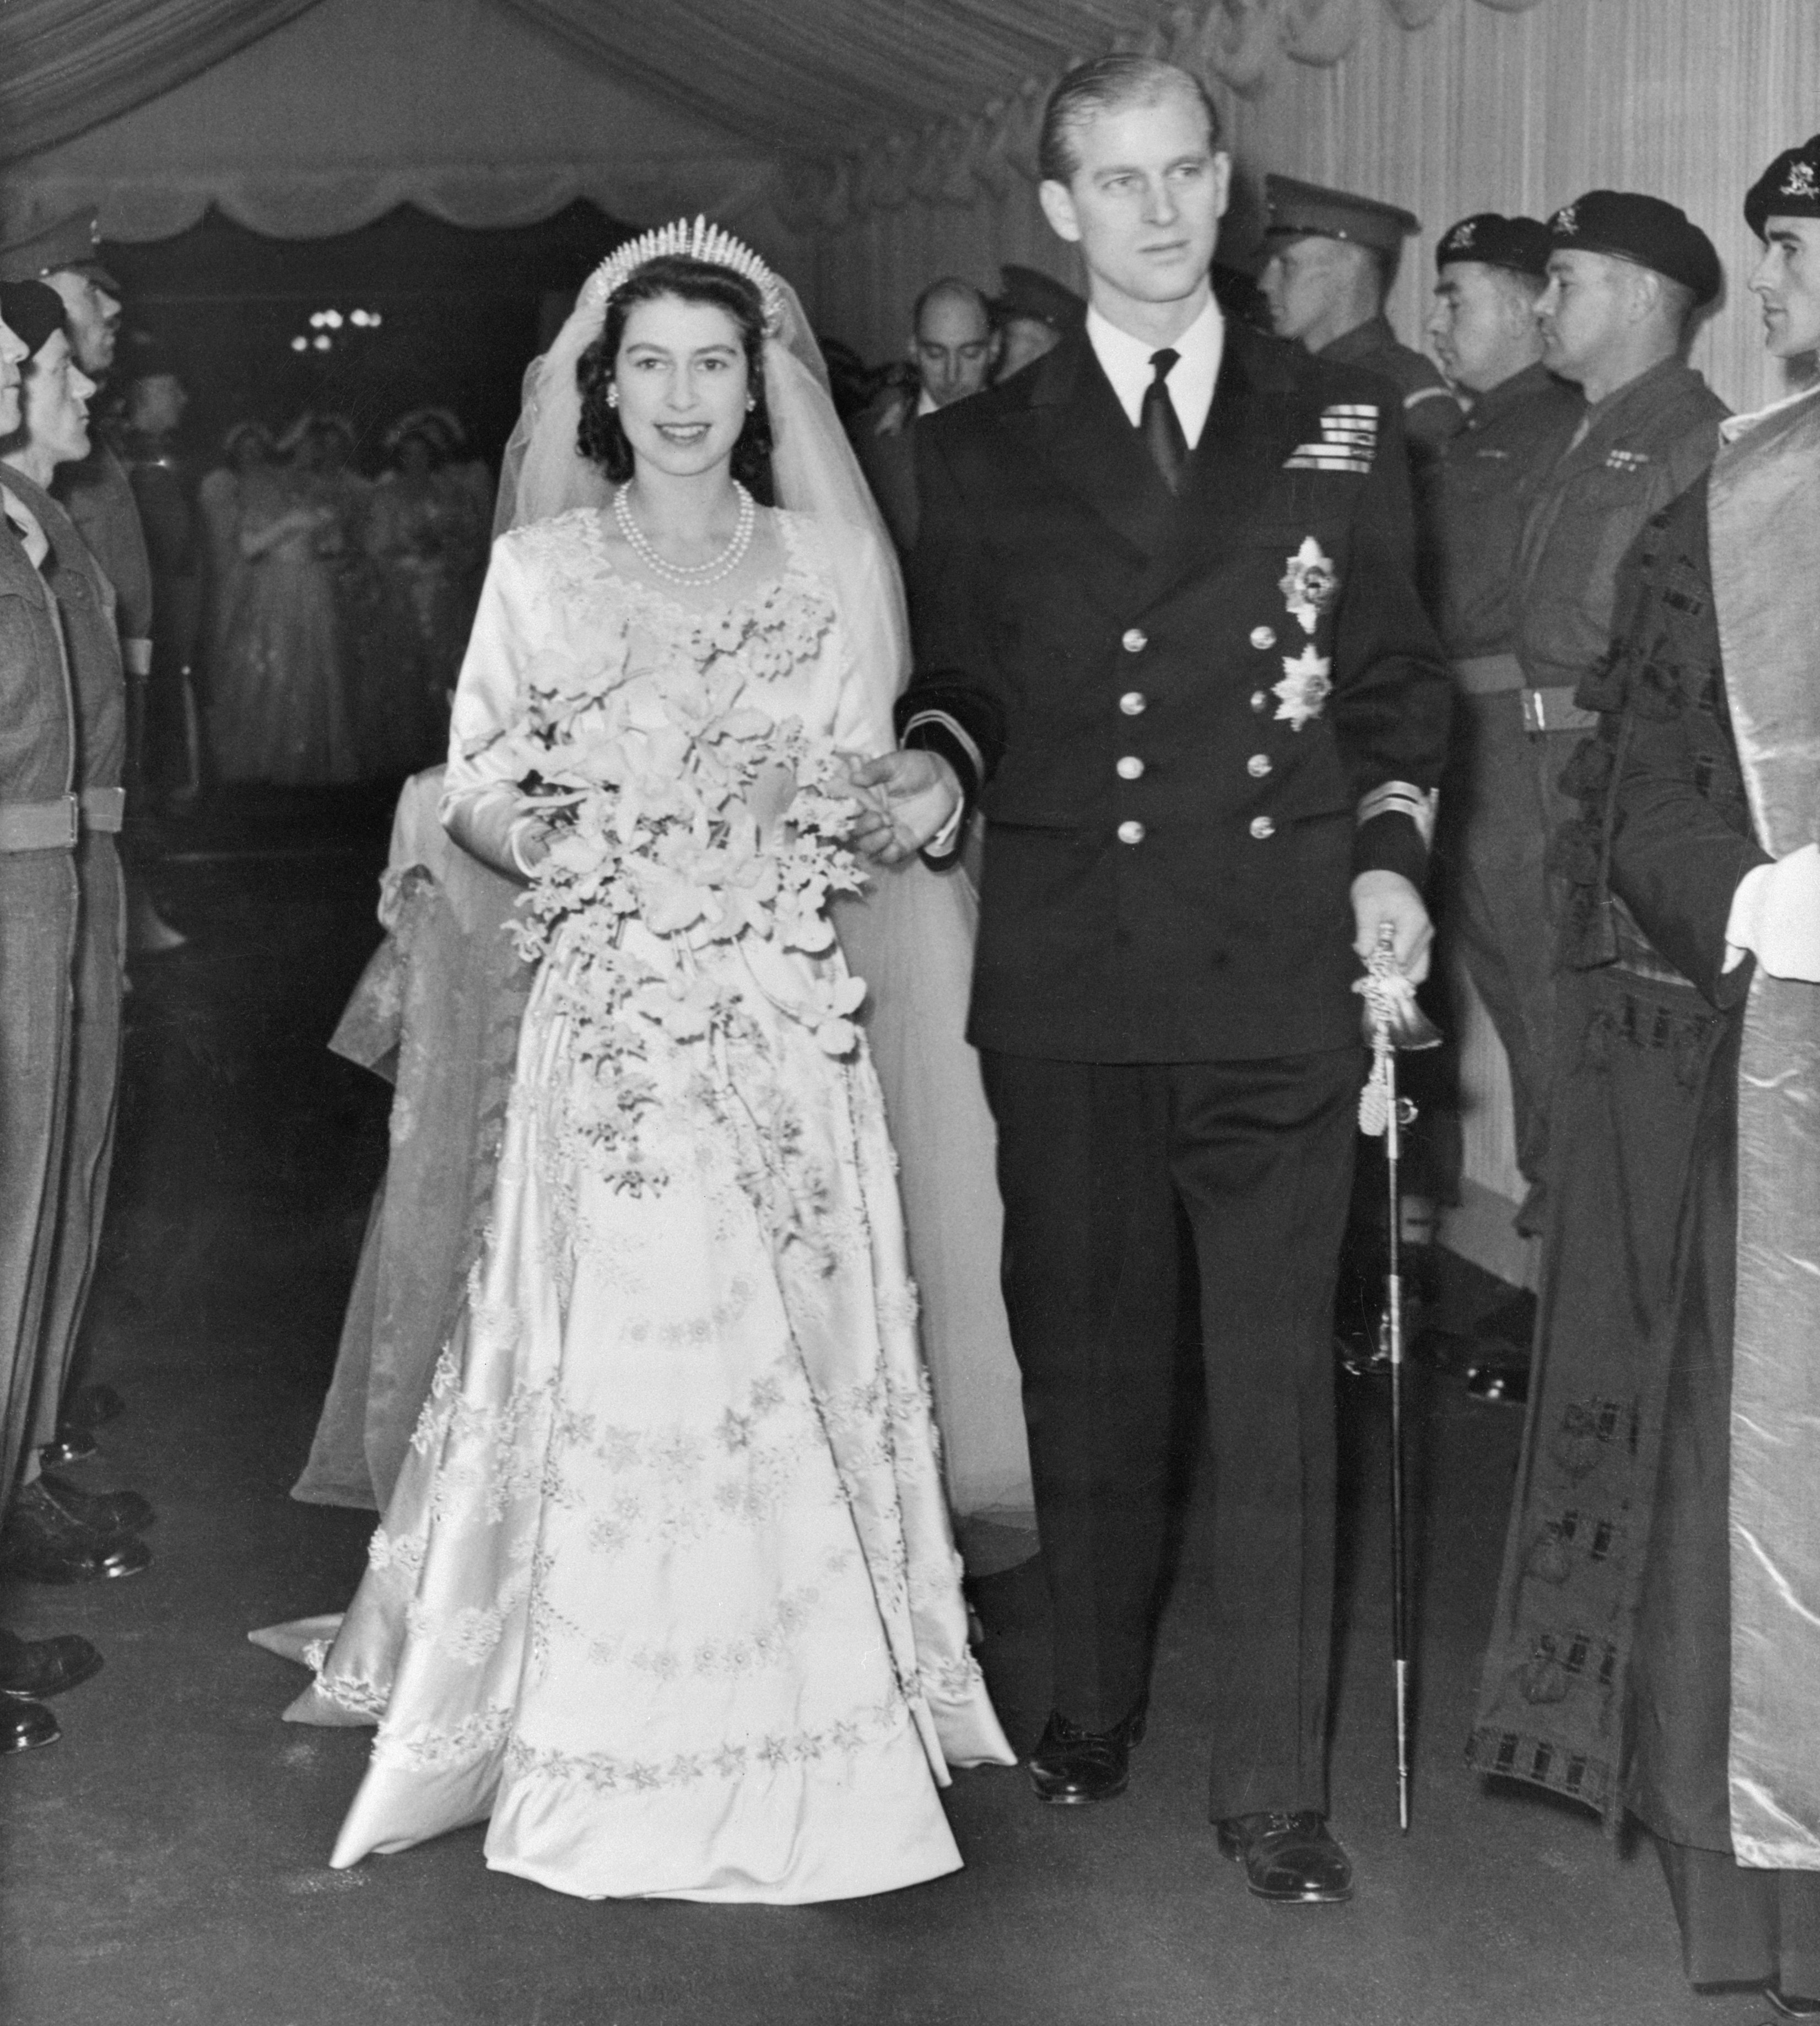 Princess Elizabeth and Prince Philip after getting married walking down the aisle of Westminster Abbey, London, on November 21, 1947 | Source: Getty Images